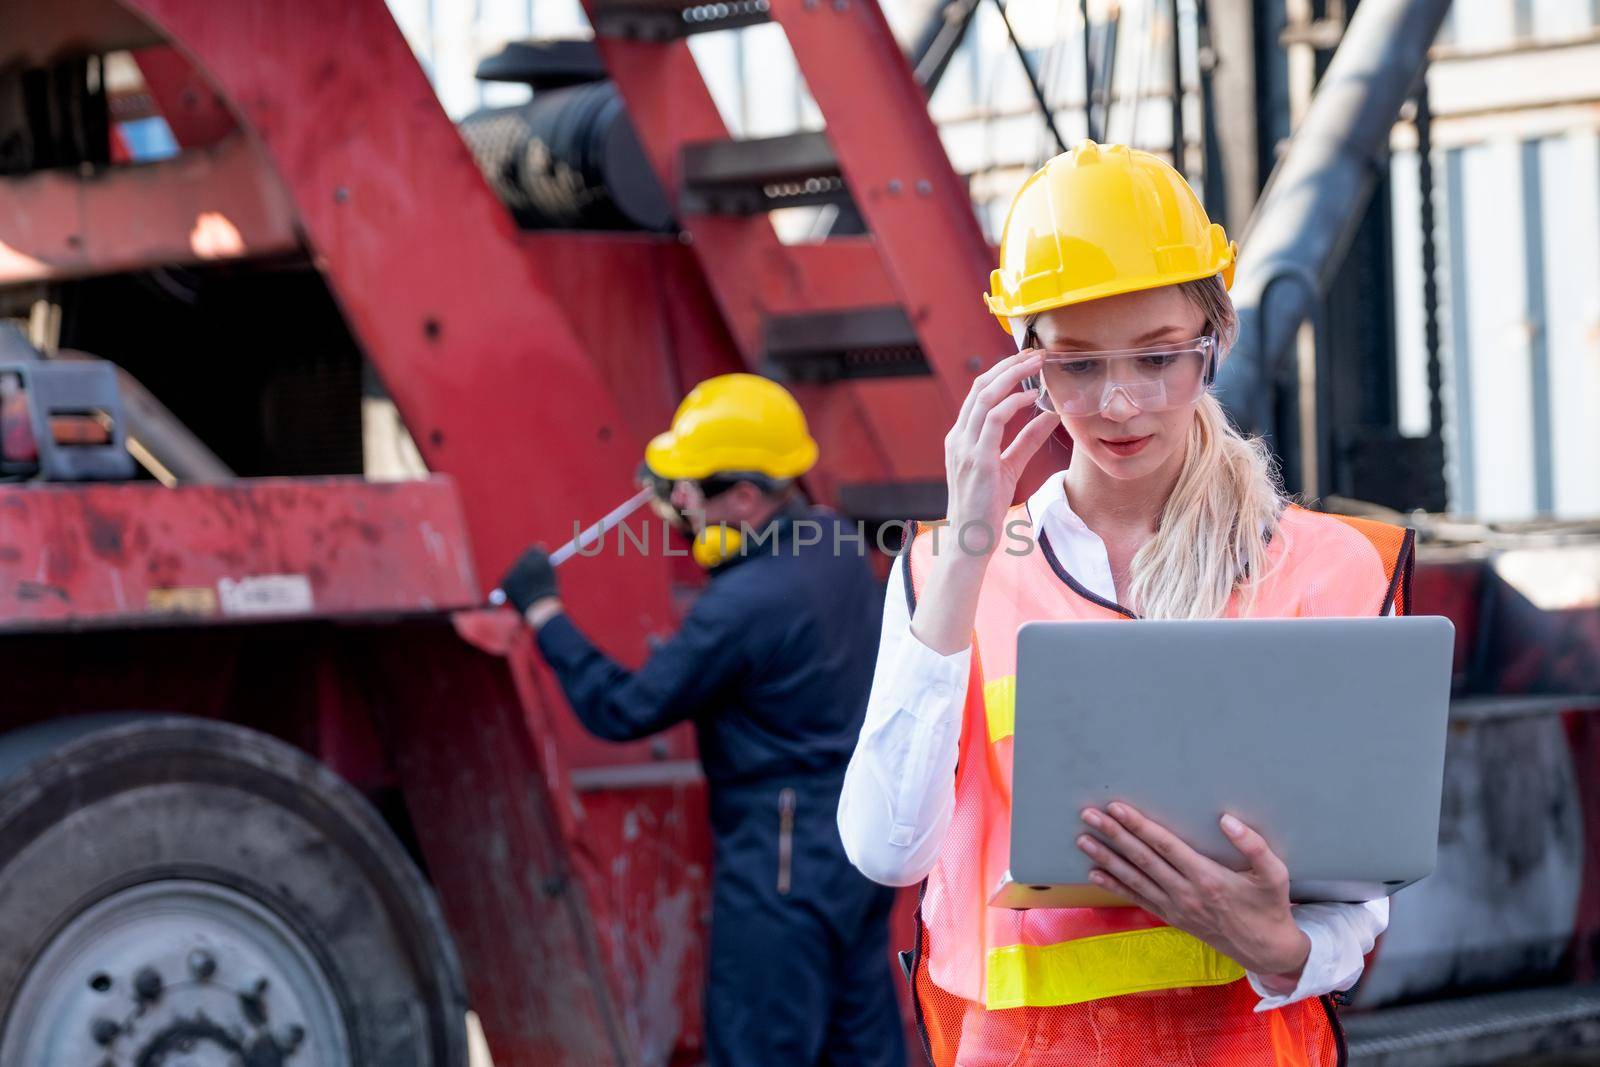 Pretty foreman woman or worker stand with touch her safety eye glasses and holding laptop for working in front of her co-worker fix the problem of vehicle in background of cargo container workplace.